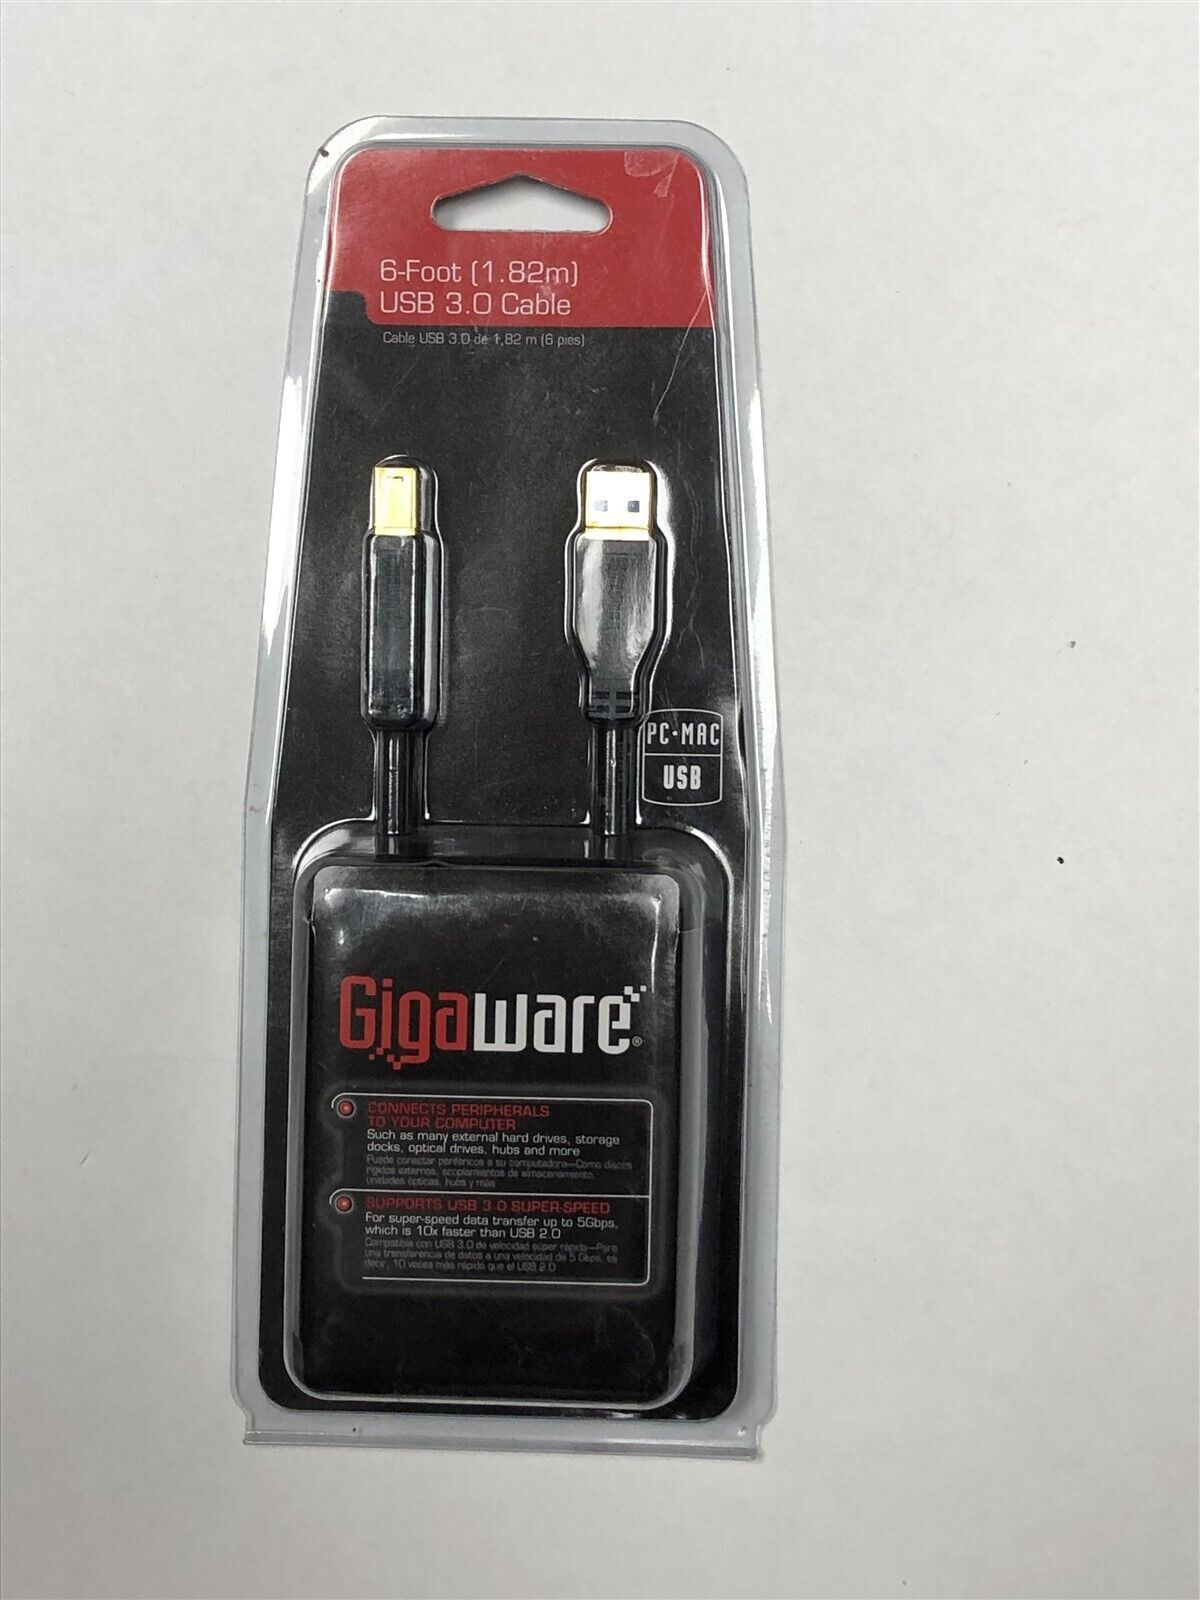  Gigaware 6 Foot Usb 3.0 Cable USB-B to USB-A 